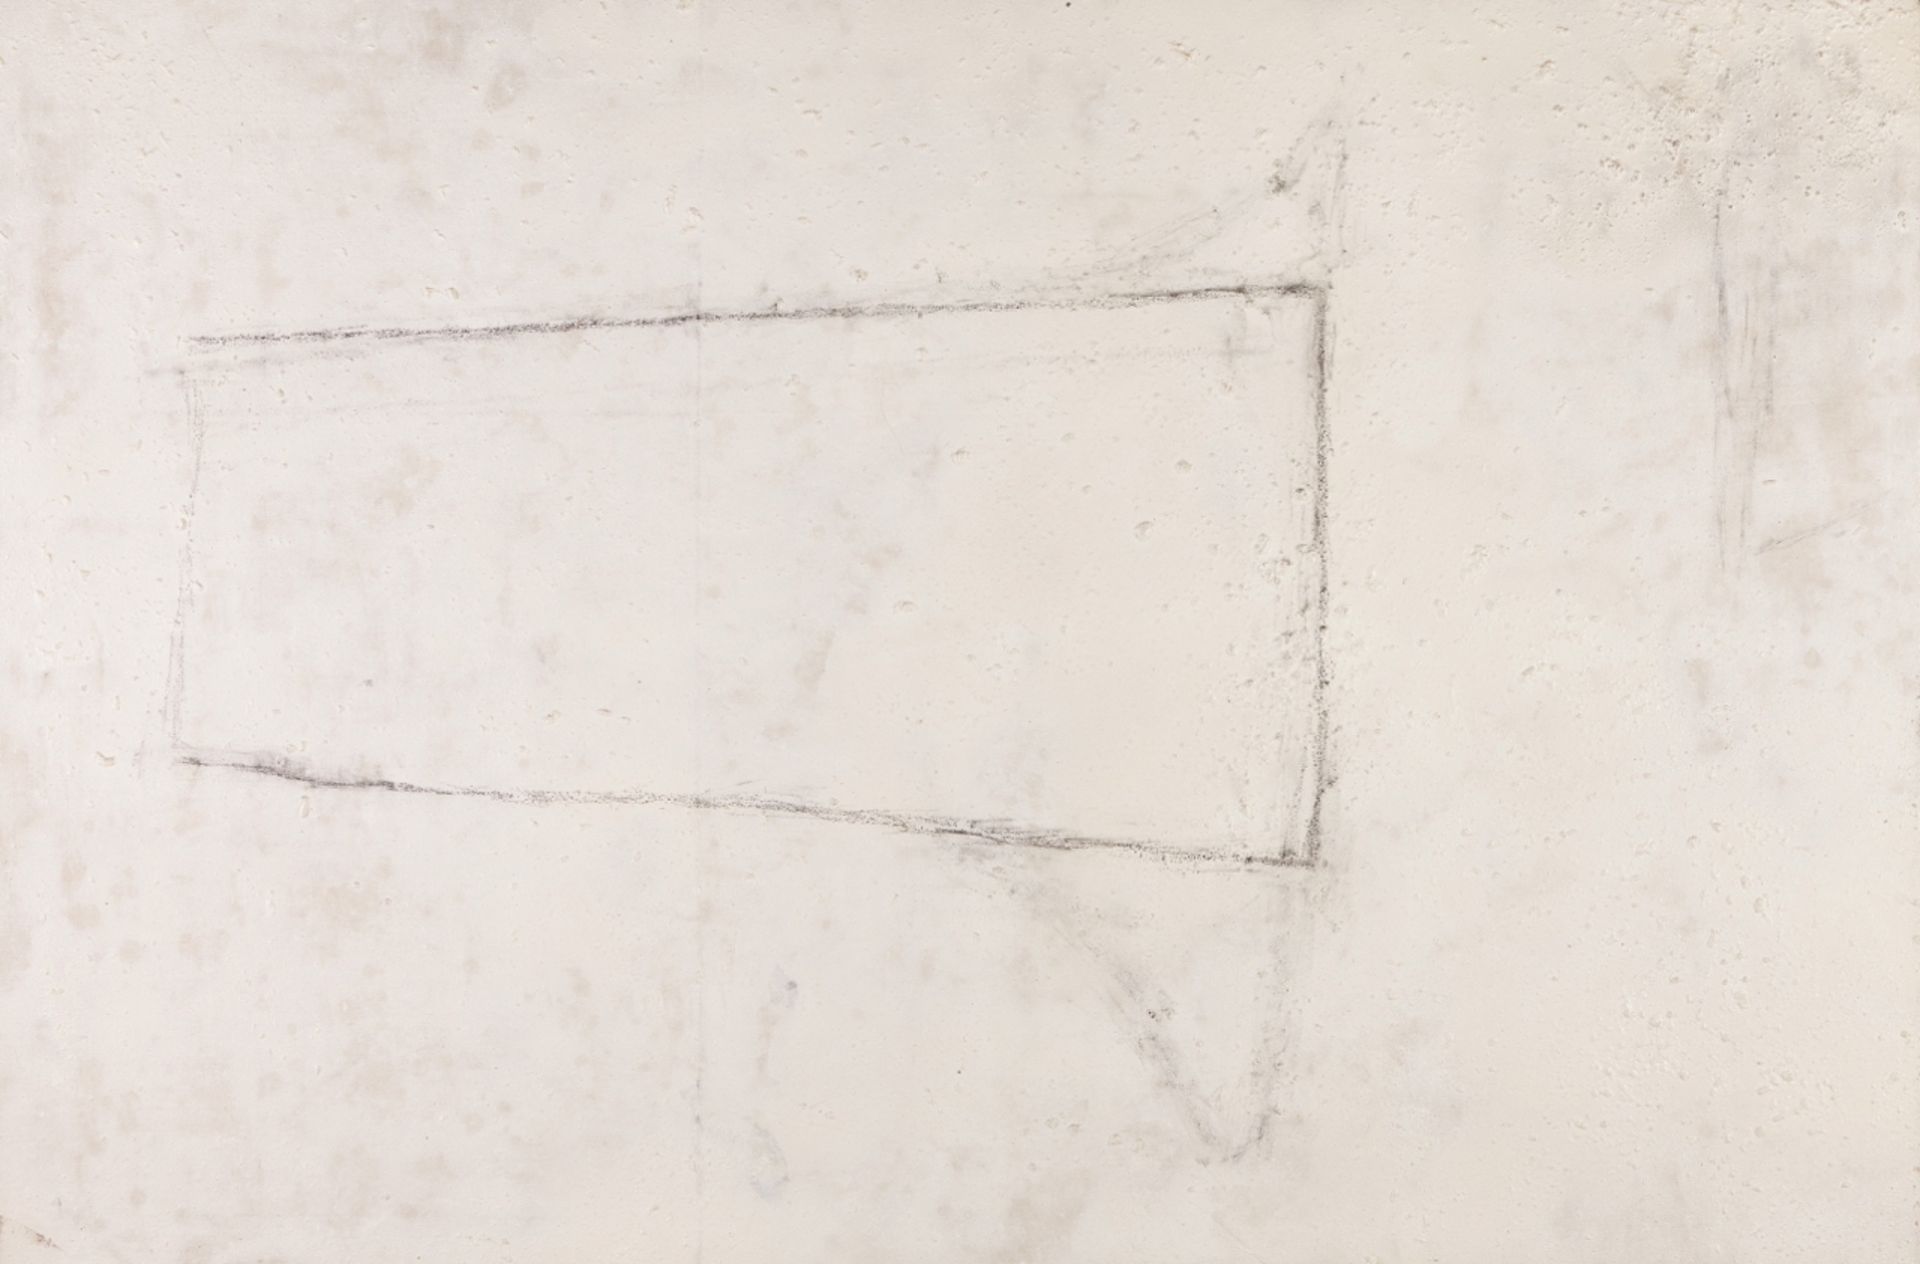 Julião Sarmento (b.1948)  "Plateau (13)"  Mixed media on canvas  Signed and dated 1992